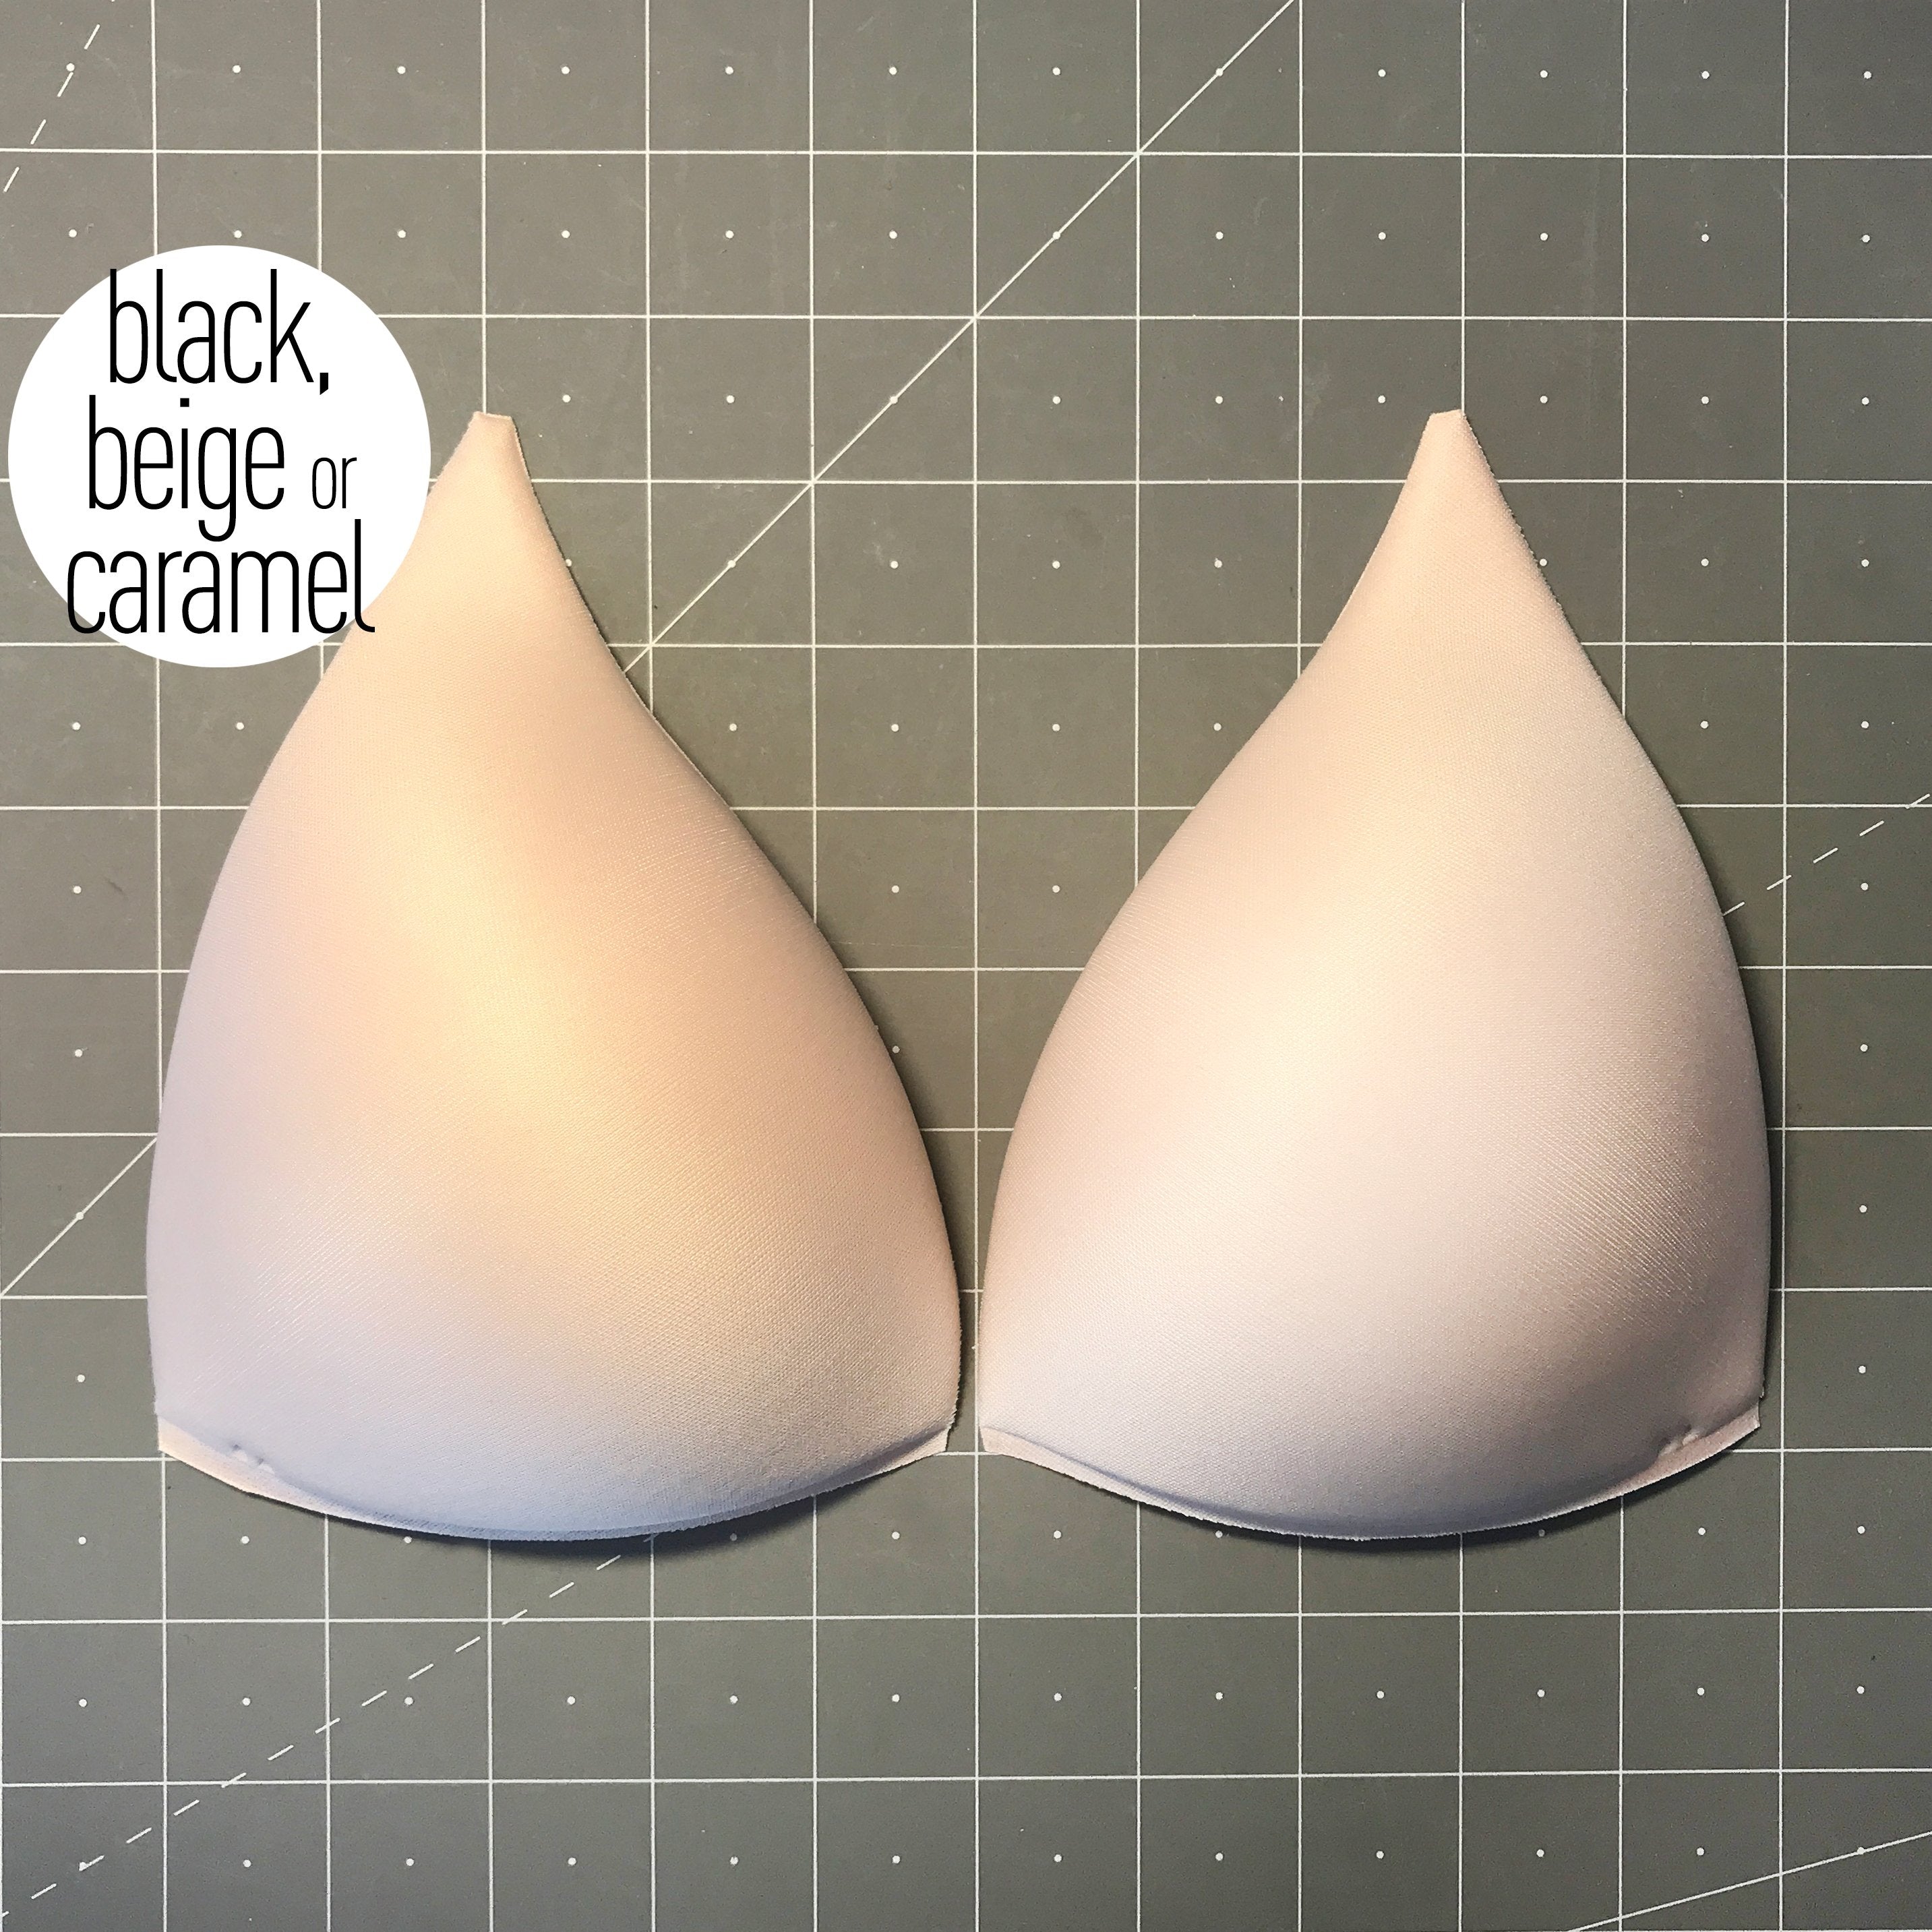 Molded Bra Cups, Long Triangular Shaped, Inserts or Sewn In for Lingerie, Swimwear, Dance Costumes, Dresses - Sizes 32-42 - Stitch Love Studio